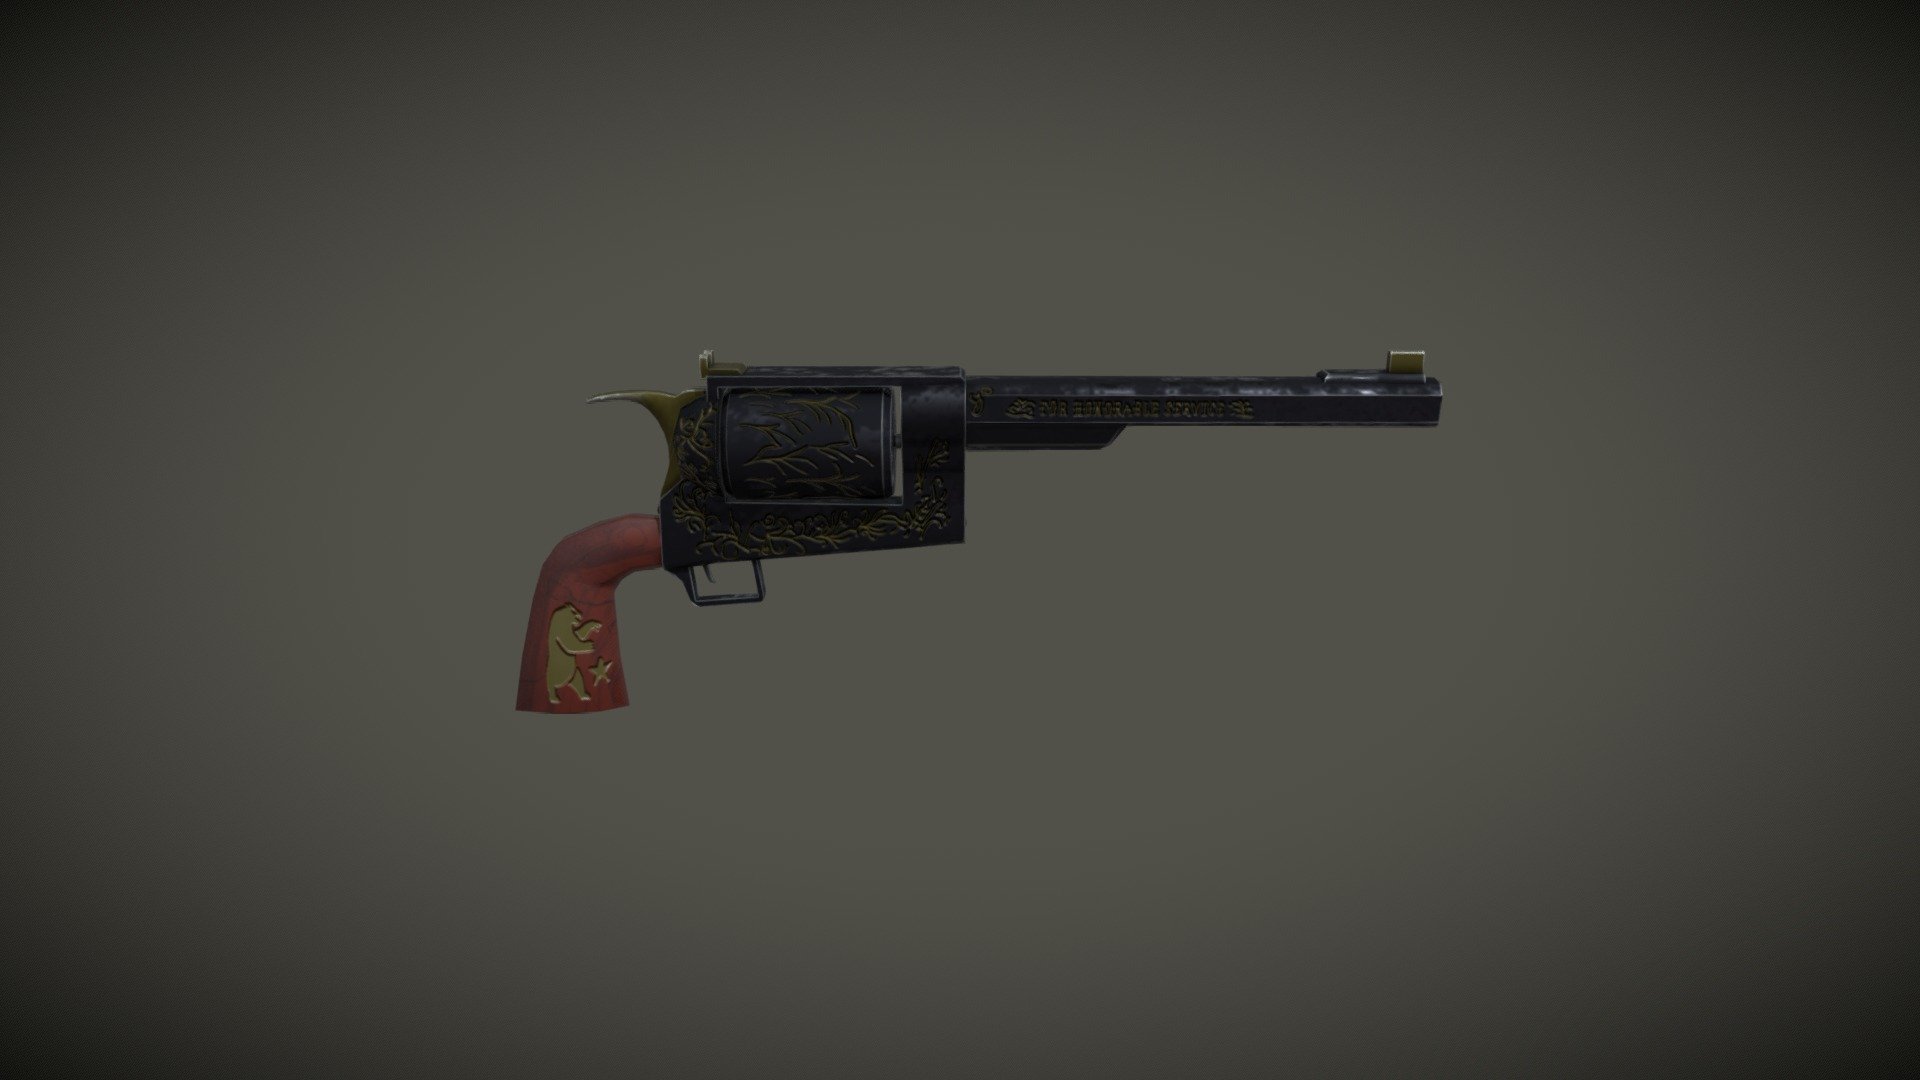 Fanart of the Ranger Sequoia, revolver from Fallout New Vegas.

Hard surface modelled in Maya.

Textured using a PBR workflow in Substance Painter 3d model